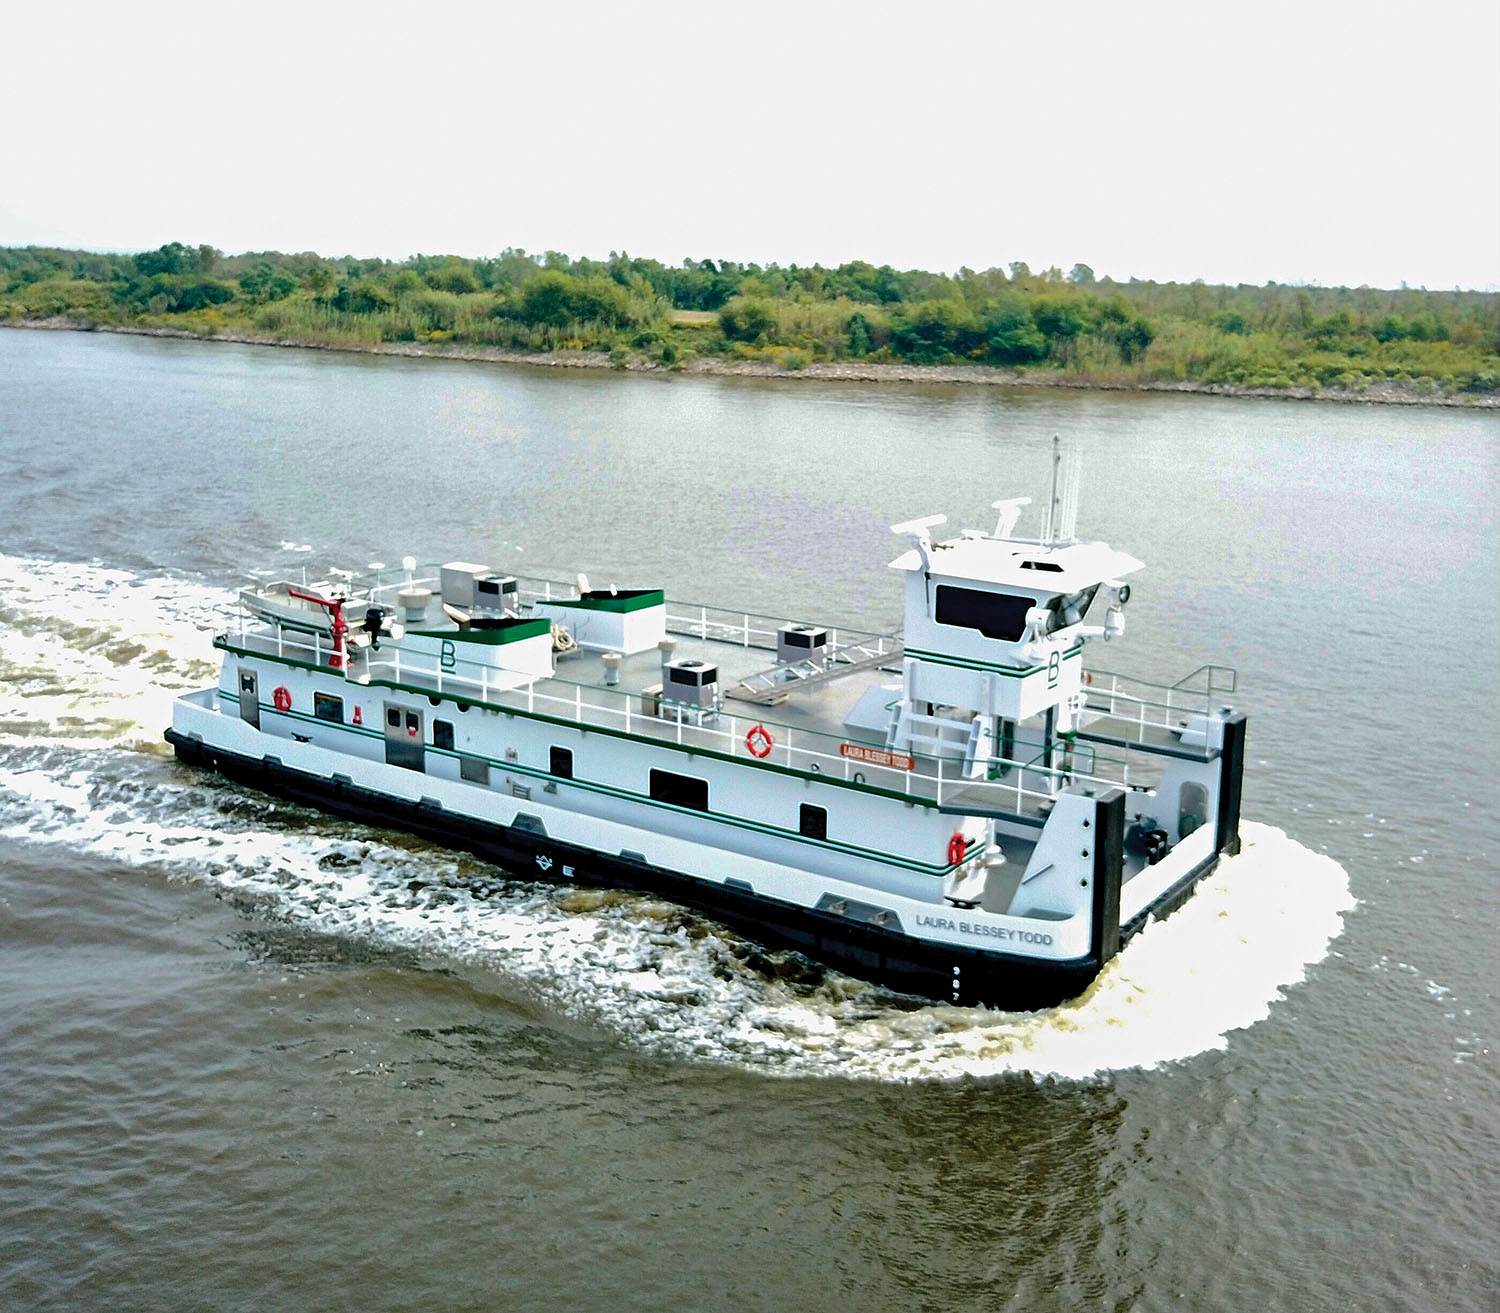 The 2,800 hp. Laura Blessey Todd is the latest in Vessel Repair’s Pacesetter line of towboats. (Photo courtesy of Vessel Repair)